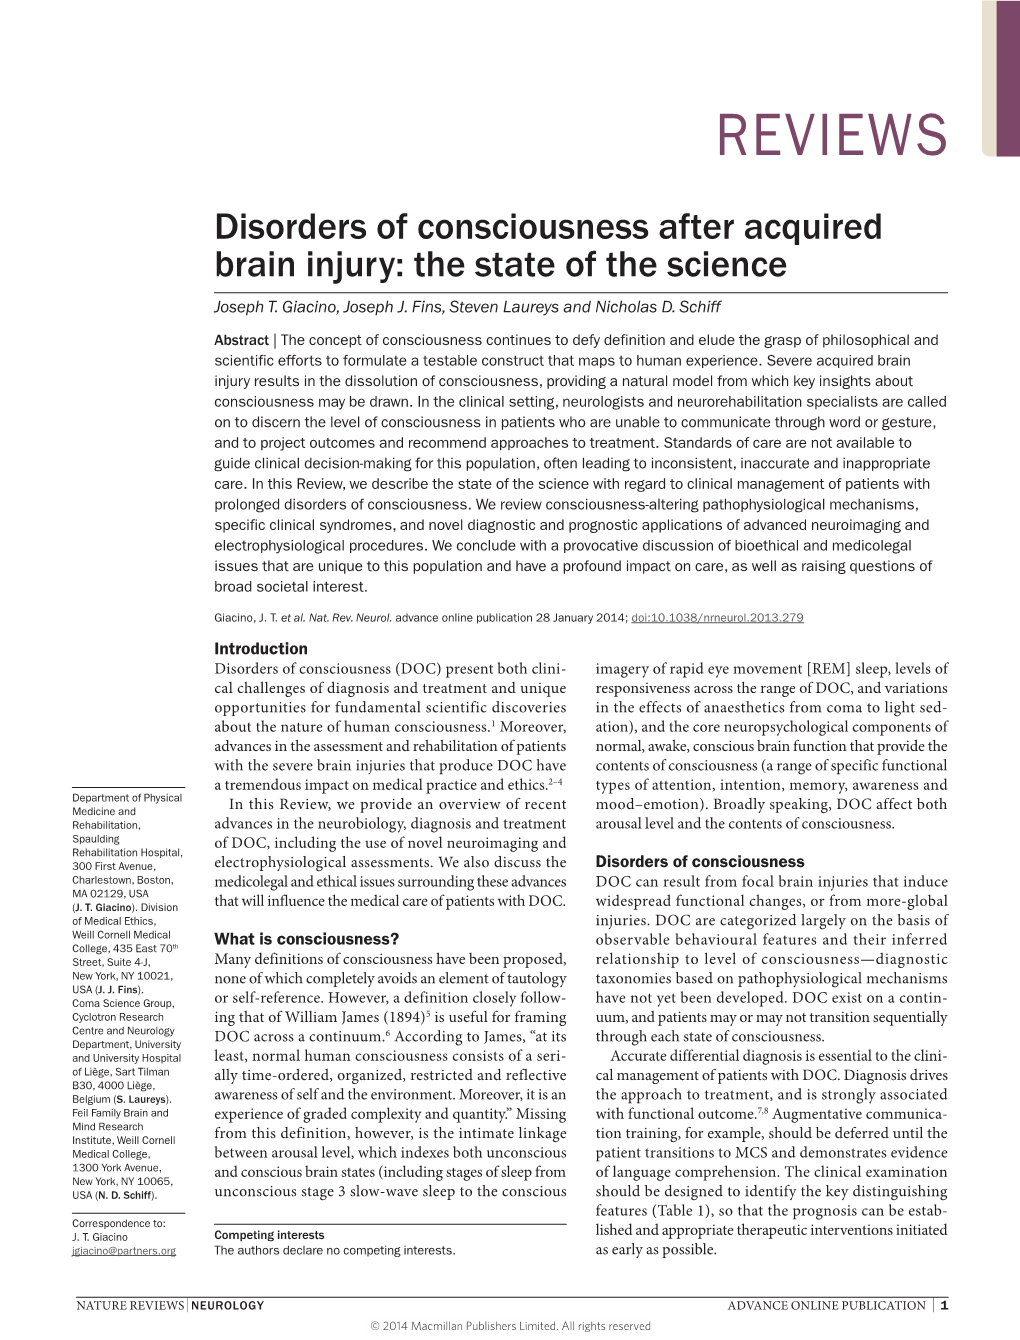 Disorders of Consciousness After Acquired Brain Injury: the State of the Science Joseph T